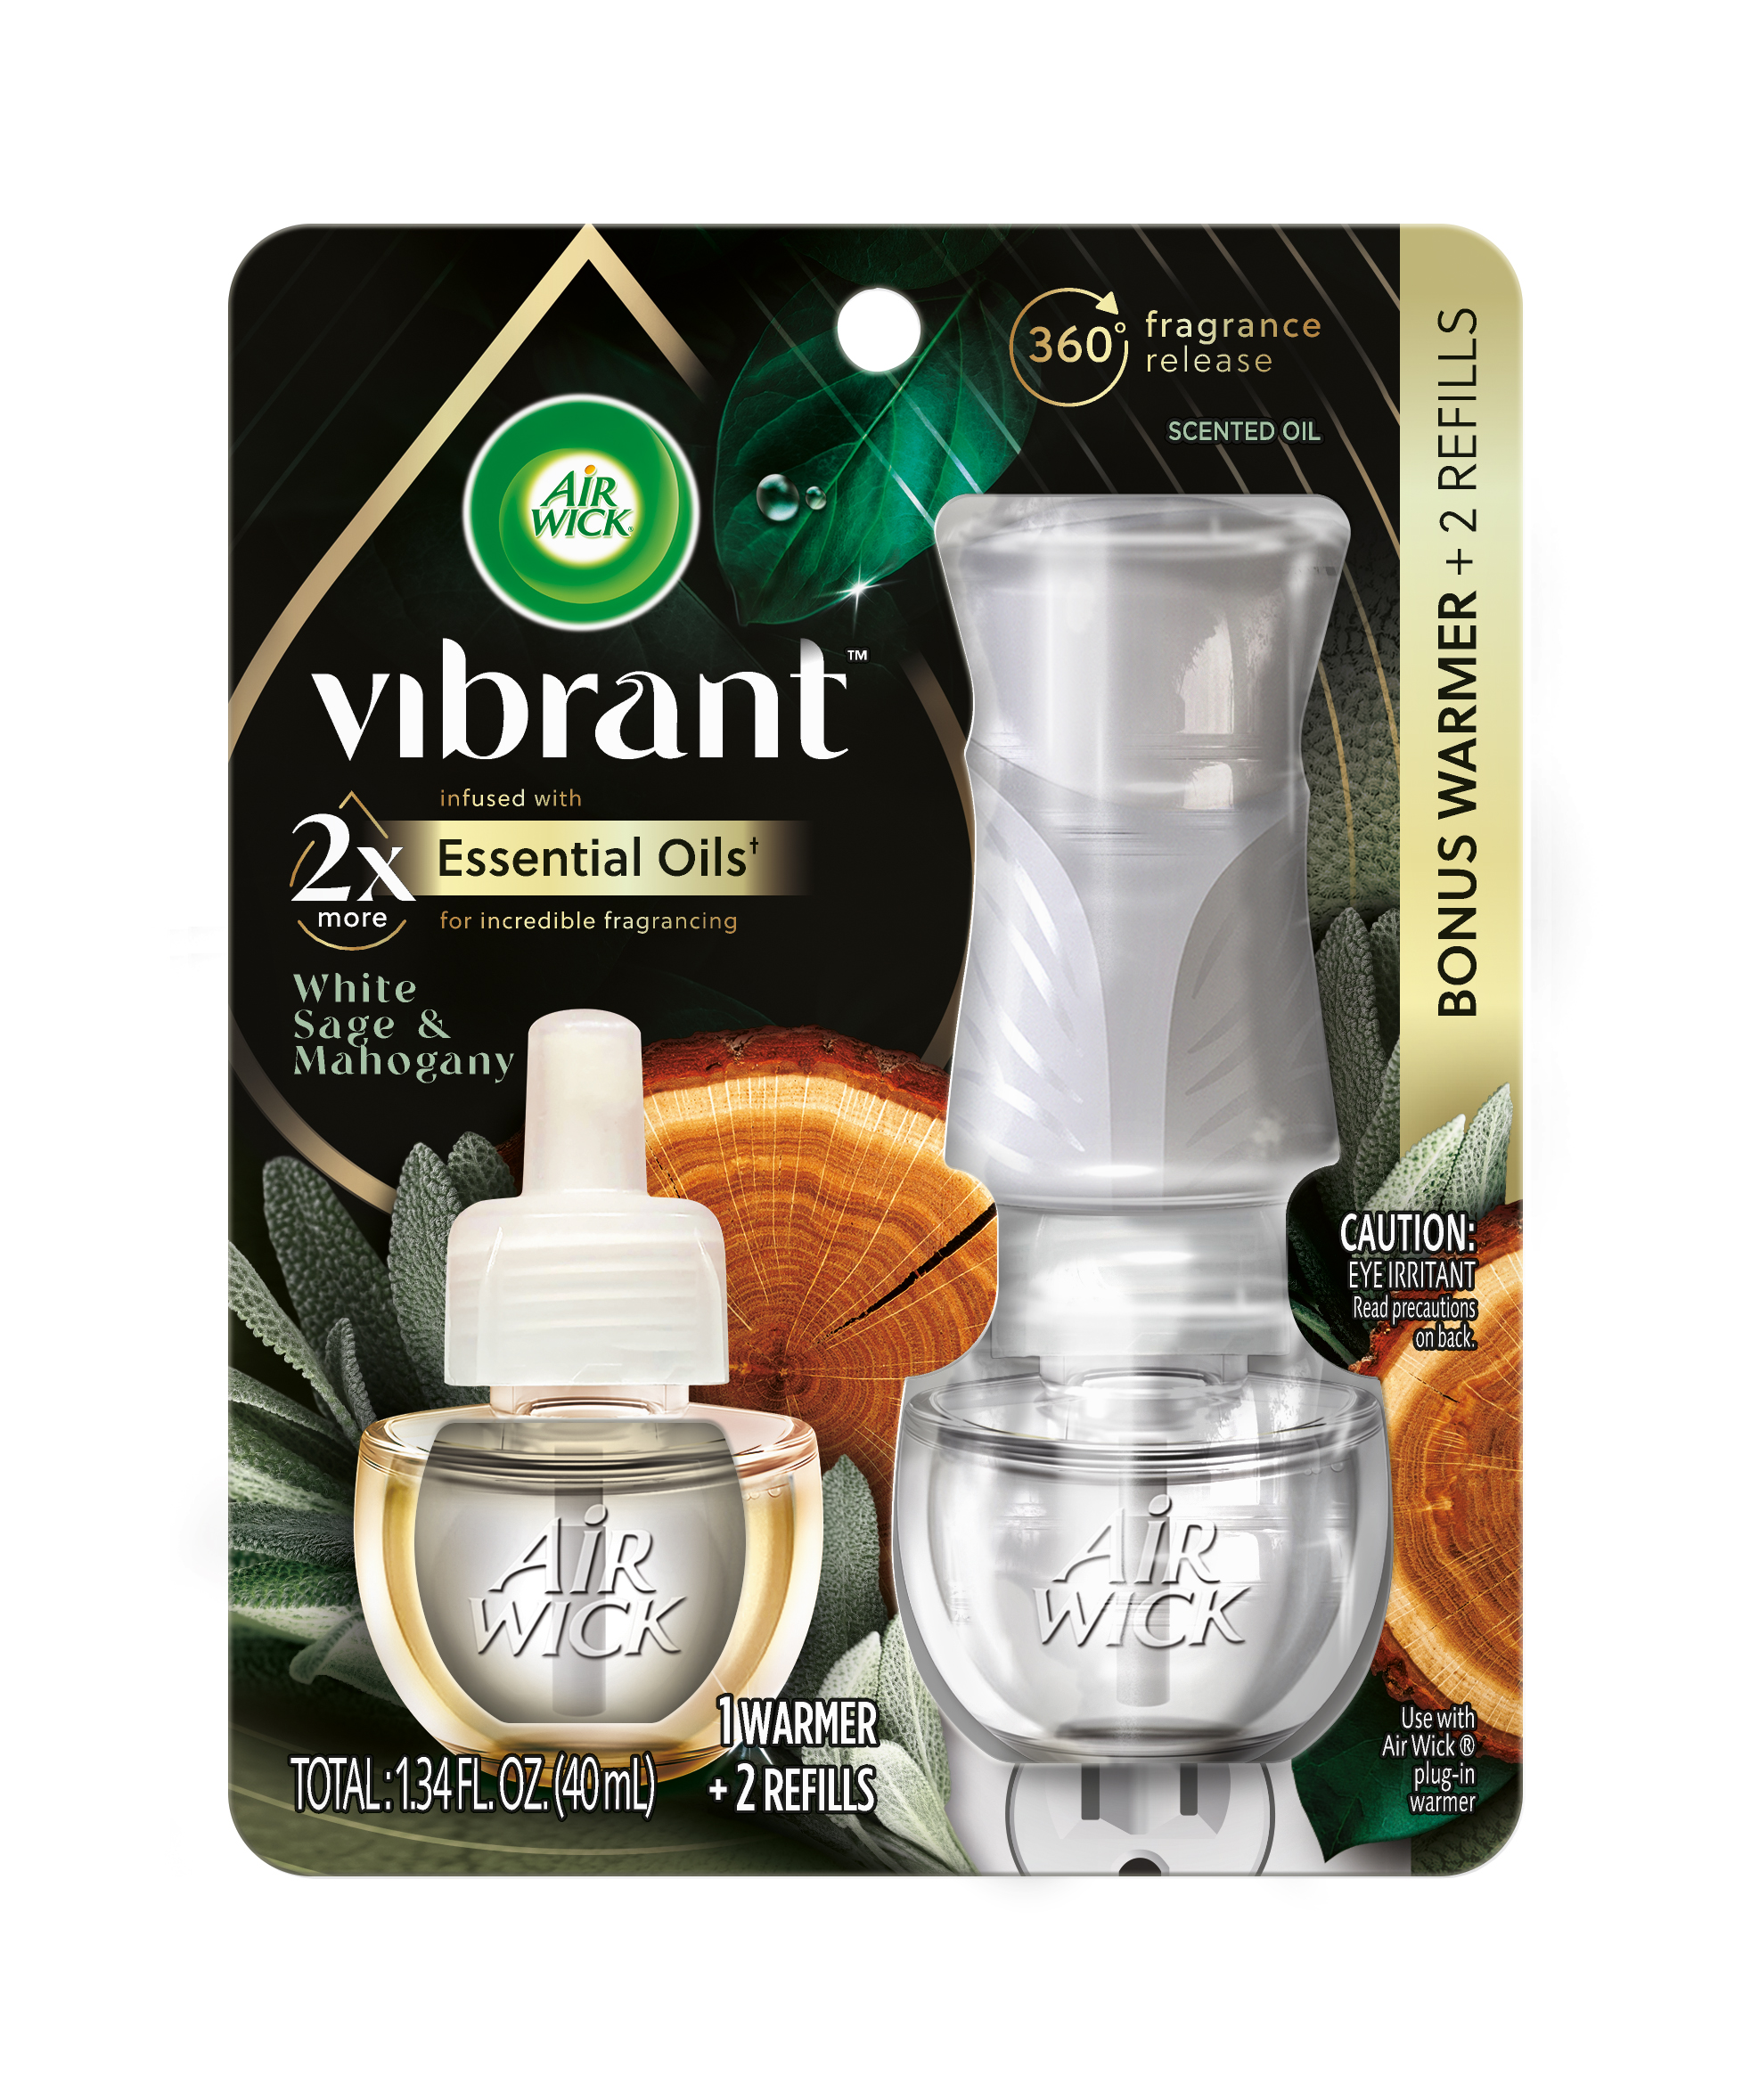 AIR WICK® Scented Oil - White Sage & Mahogany - Kit (Vibrant)